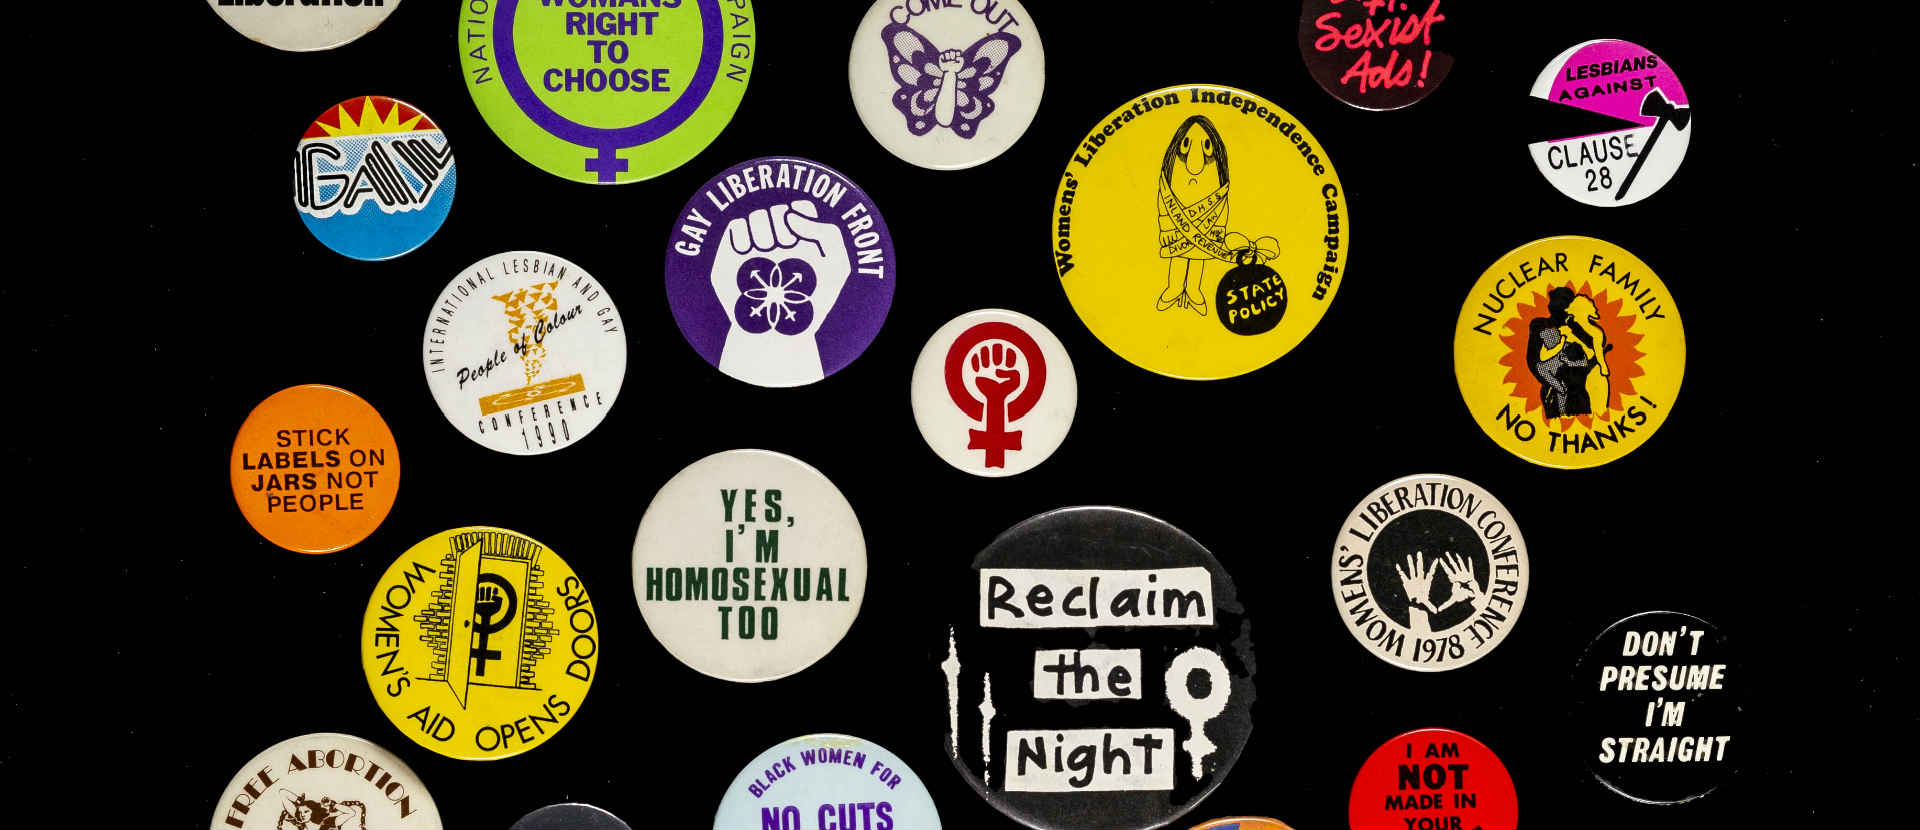 A variety of campaigning badges.